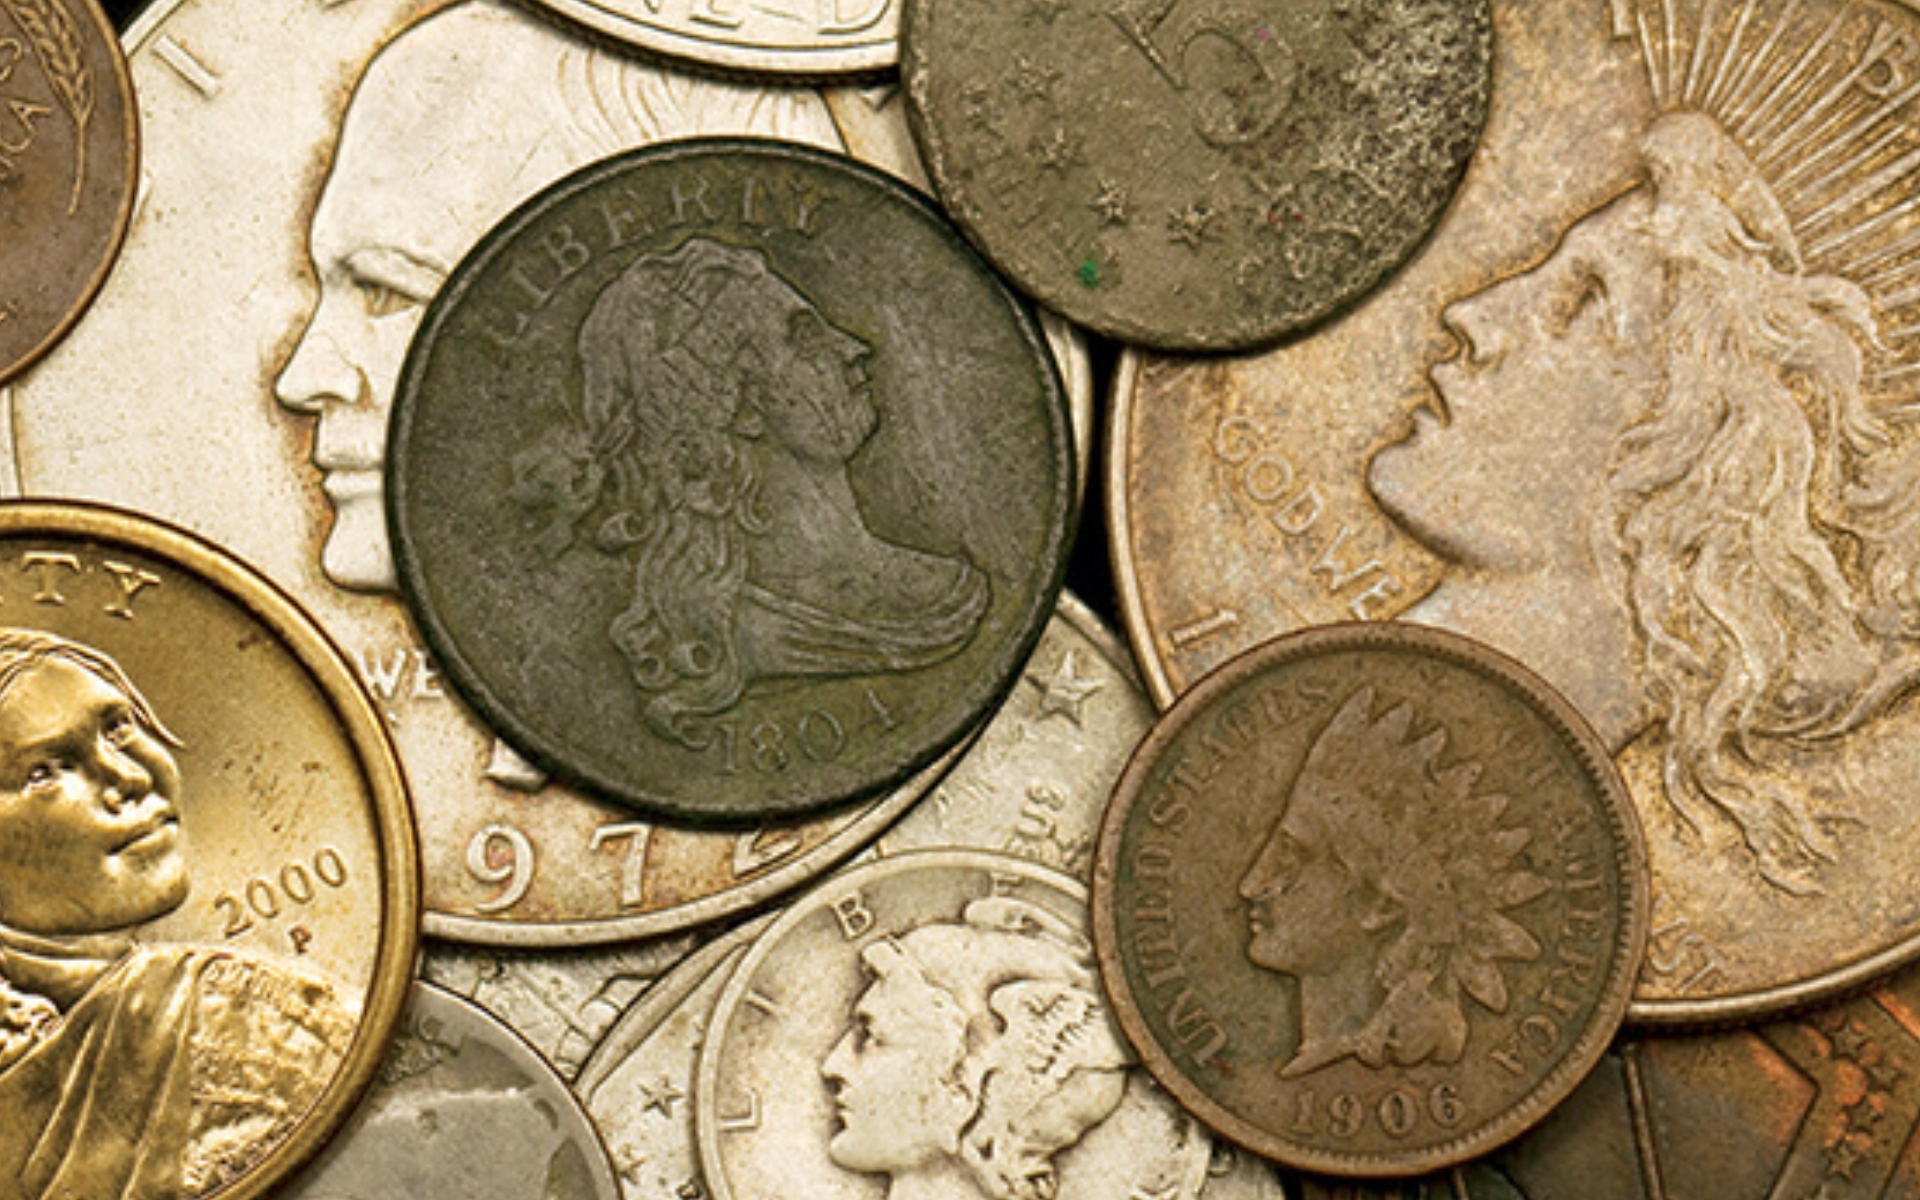 Coin Collecting for Beginners: 15+ Useful Guidelines You Need to Know